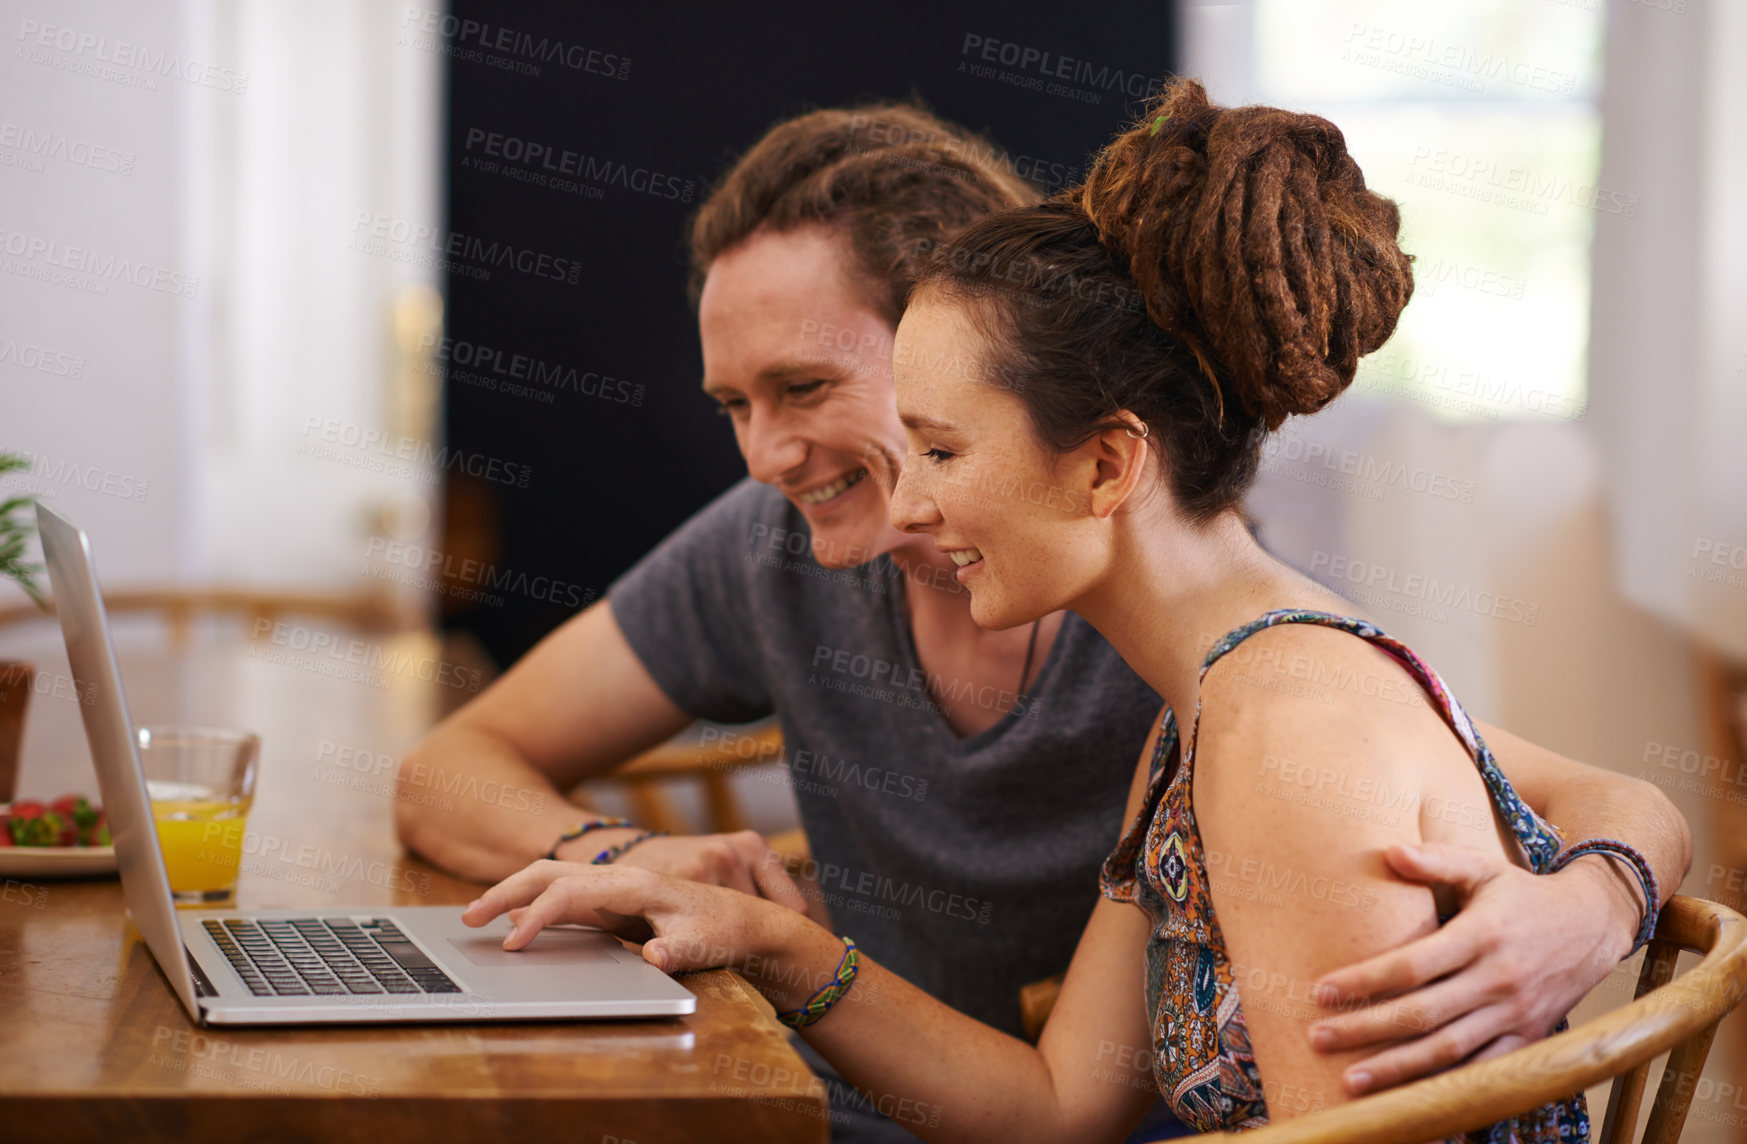 Buy stock photo Home, couple and typing with laptop, keyboard and planning with online reading and research. Breakfast, apartment and dreadlocks with man or woman with computer and internet with tech, rasta or email